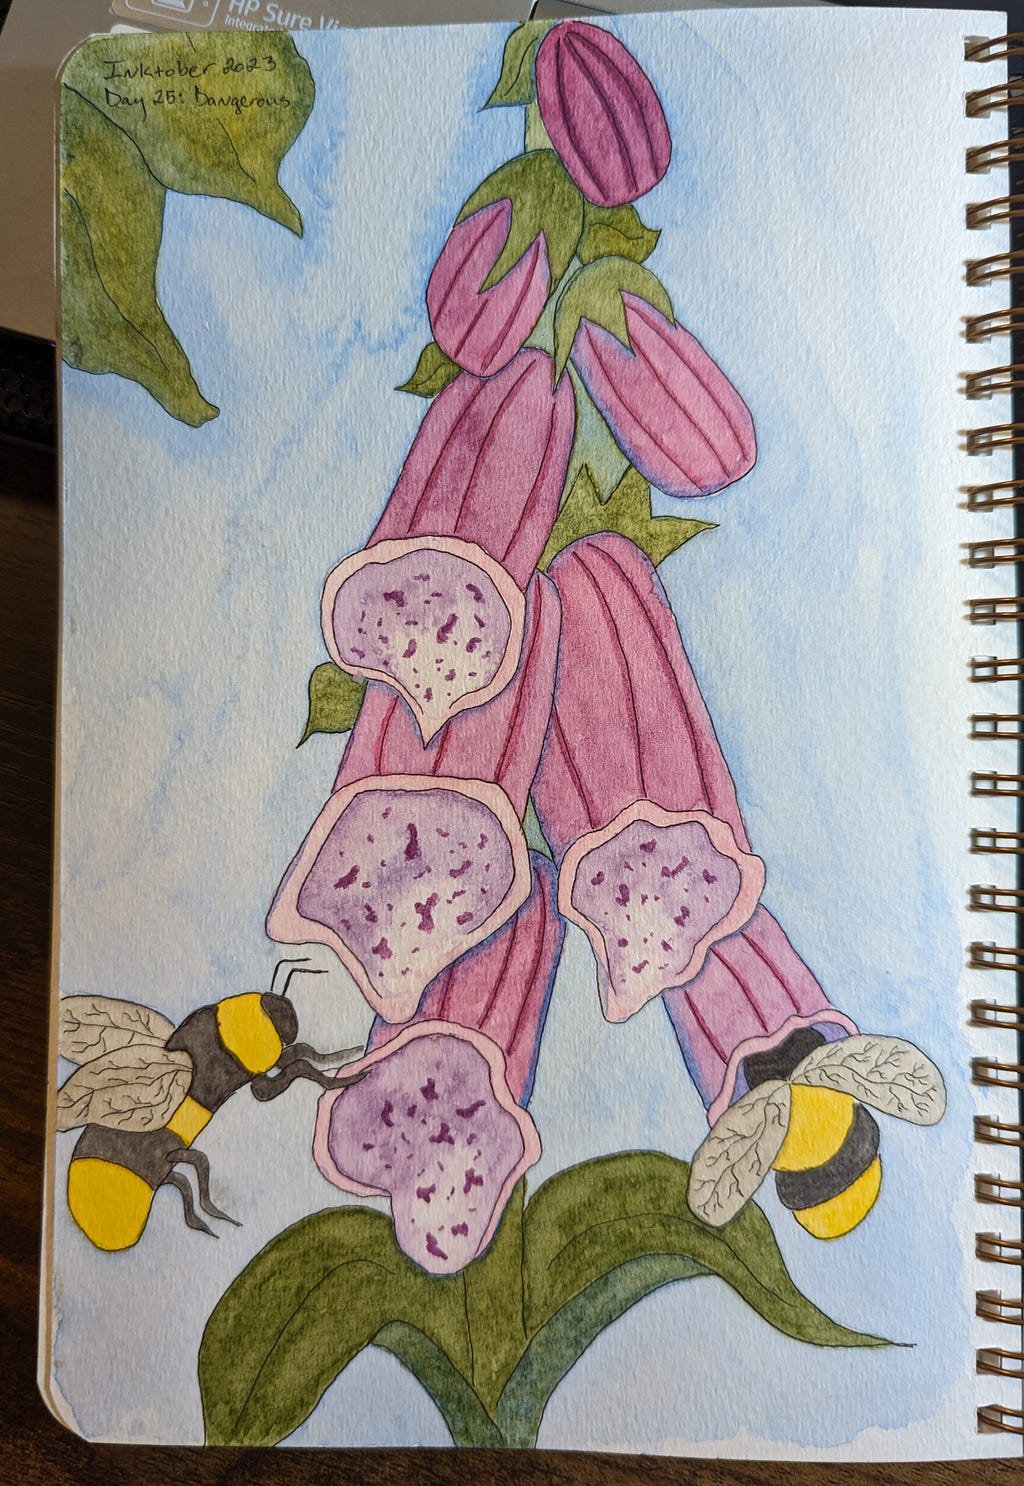 Two bees on foxglove flowers for the prompt “dangerous.” Foxgloves are poisonous.